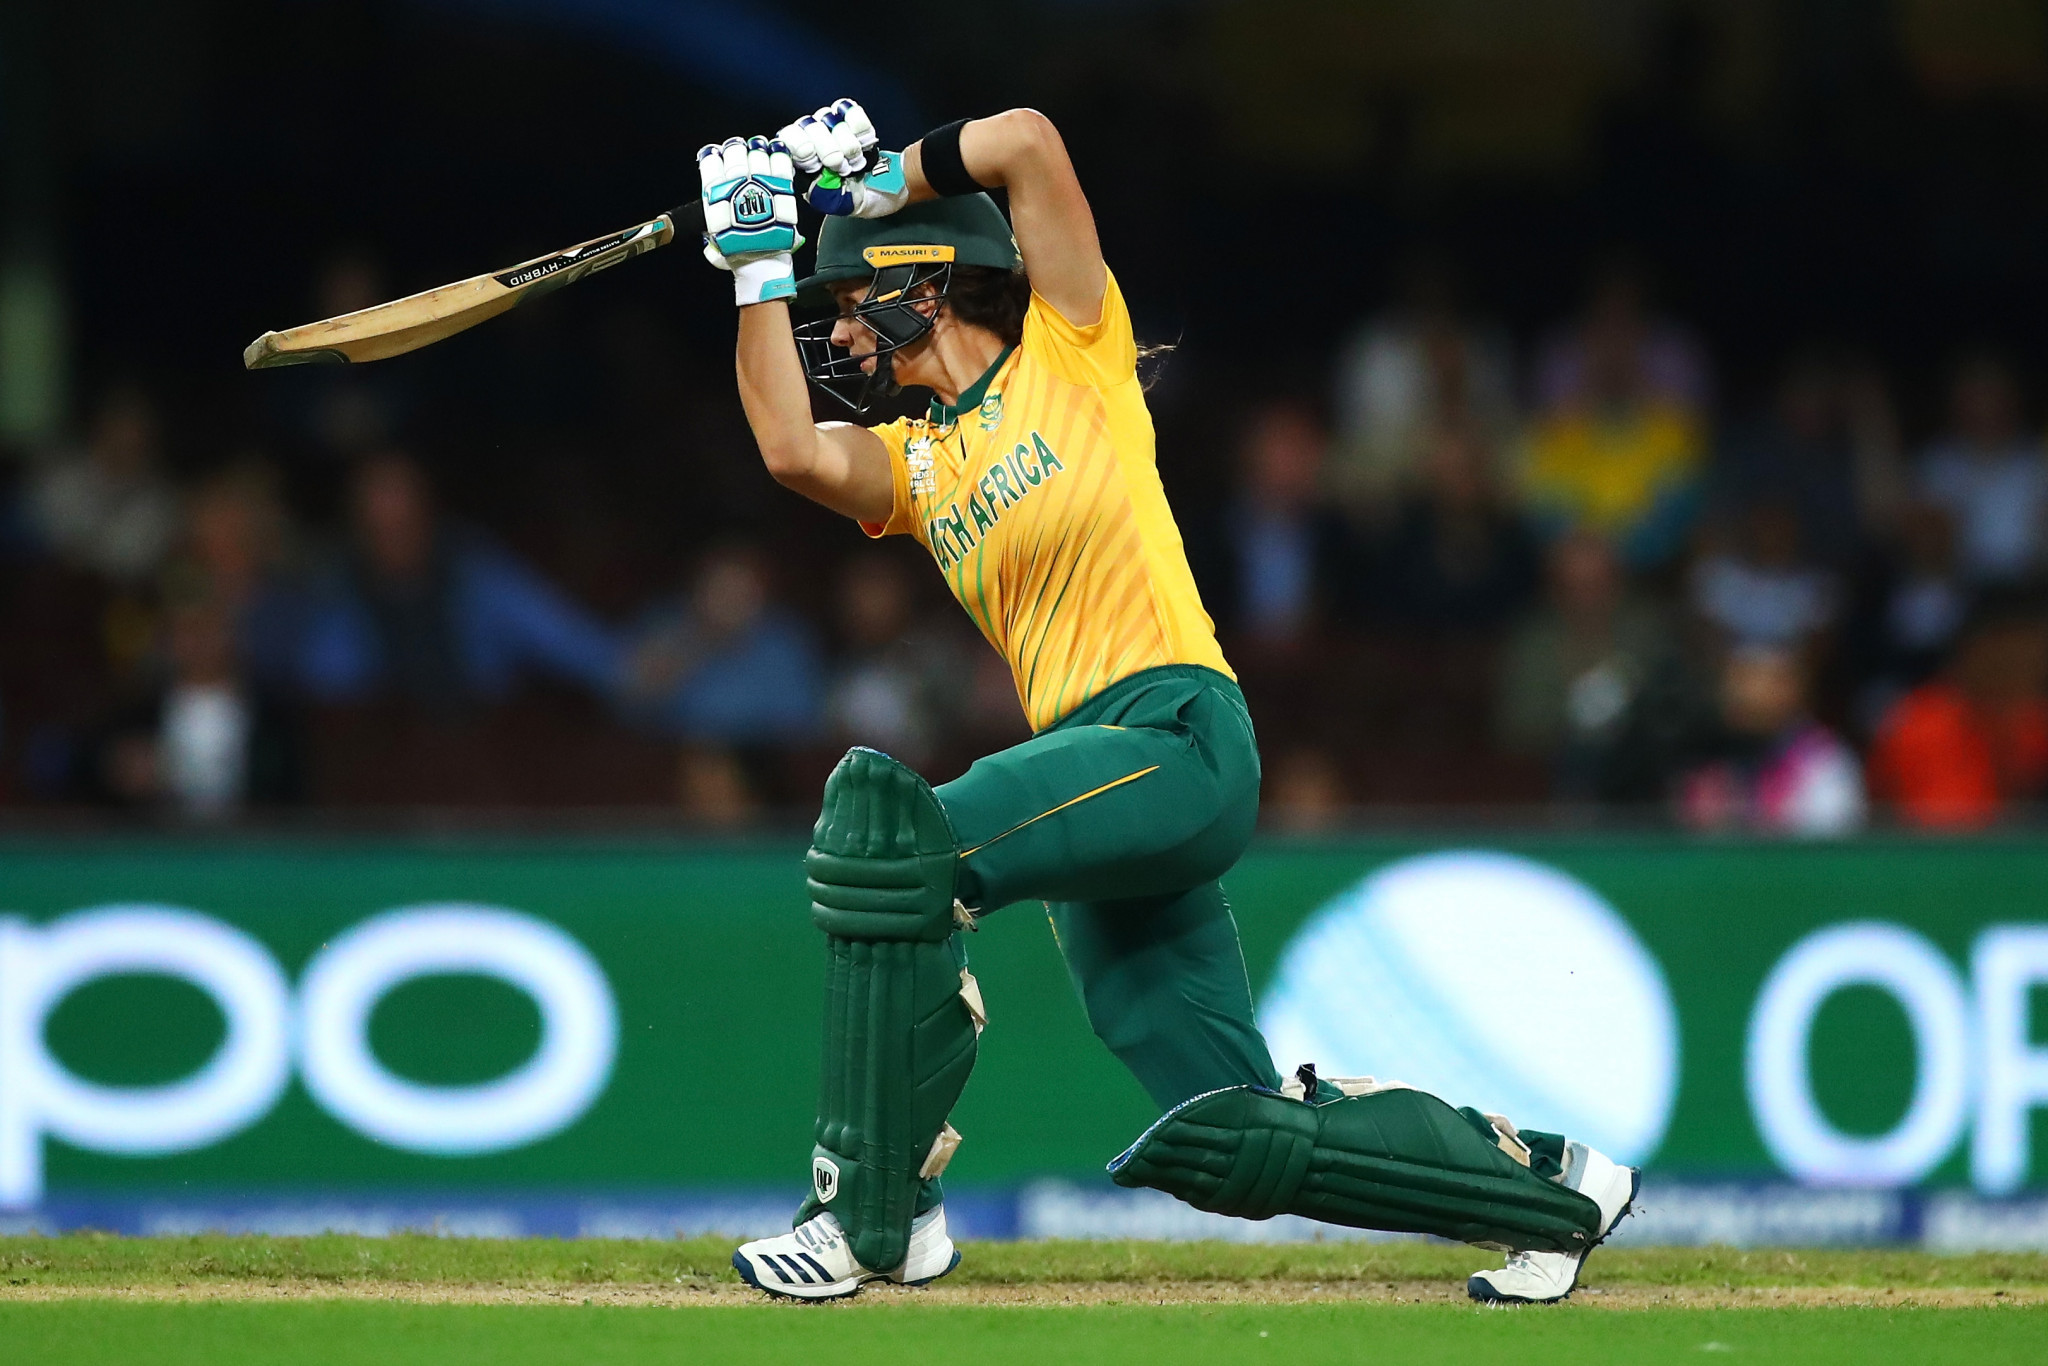 Laura Wolvaardt scored 75 to help South Africa beat Pakistan at the Women's Cricket World Cup ©Getty Images  